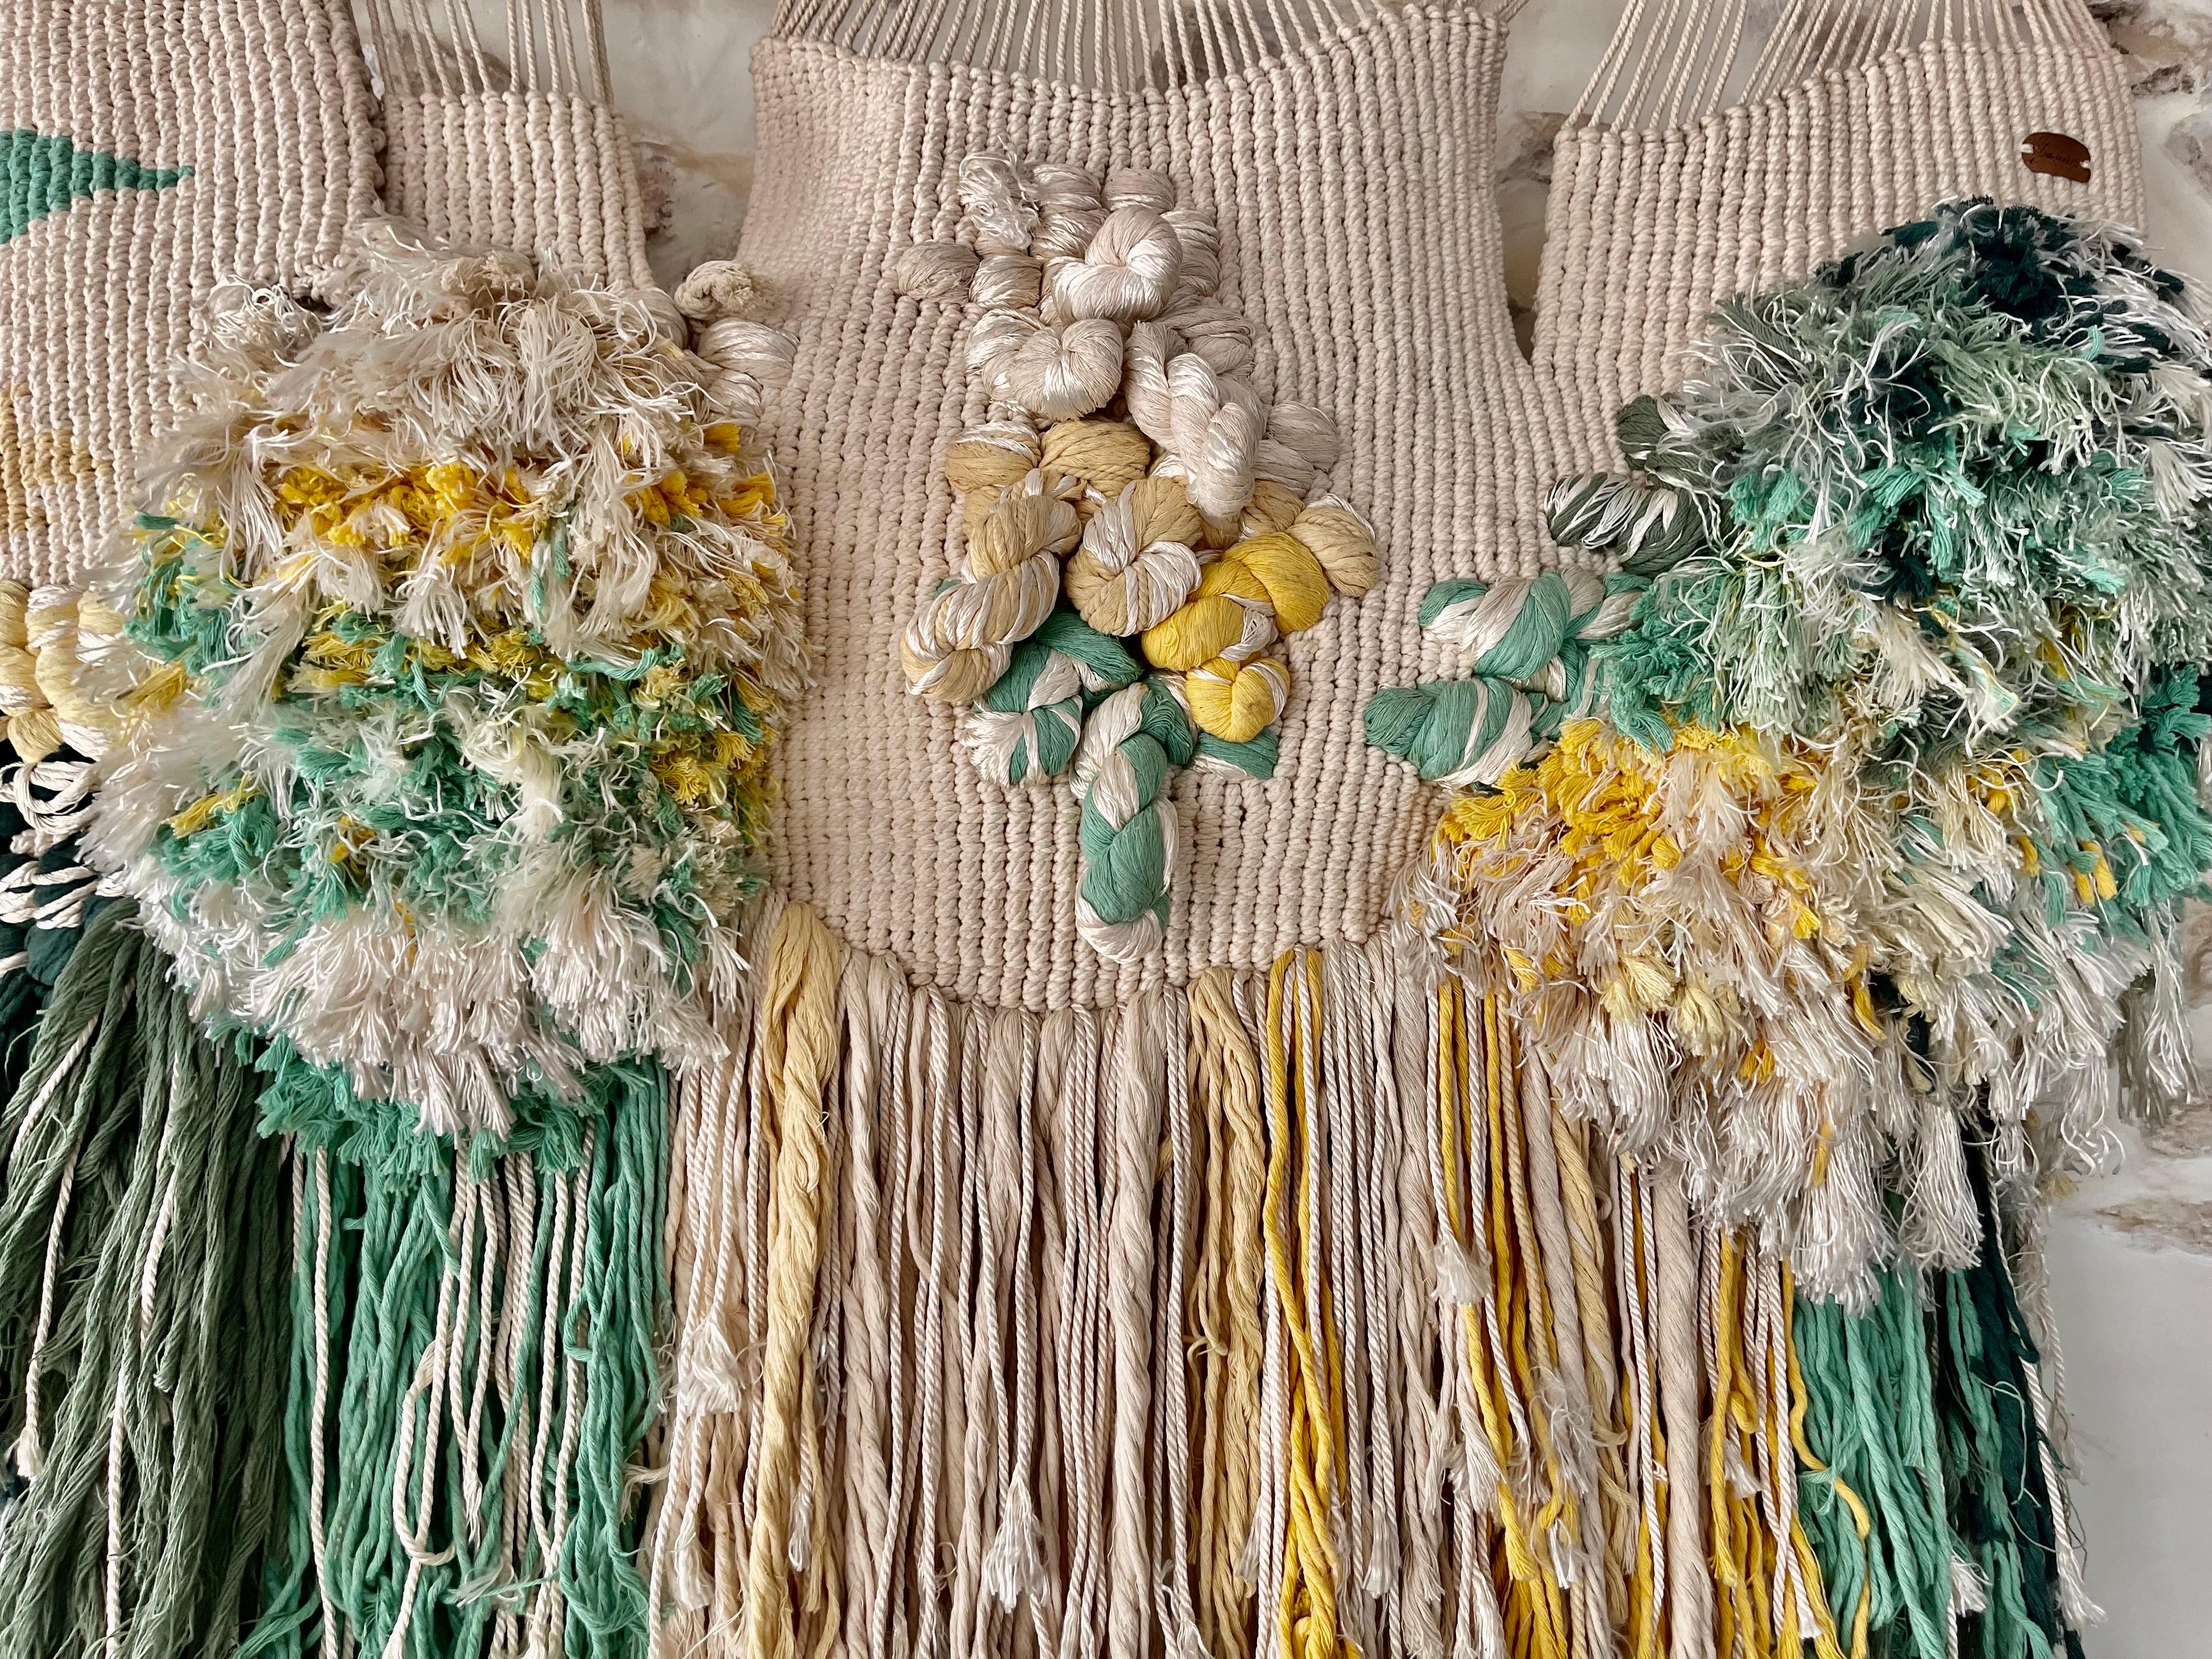 Modern Design ! Neo Classique ! bohemian decor, macramé wall hangings should be at the top of your list. These lightweight, airy pieces are typically made with natural materials (think cotton cord and merino wool), and they create an instant